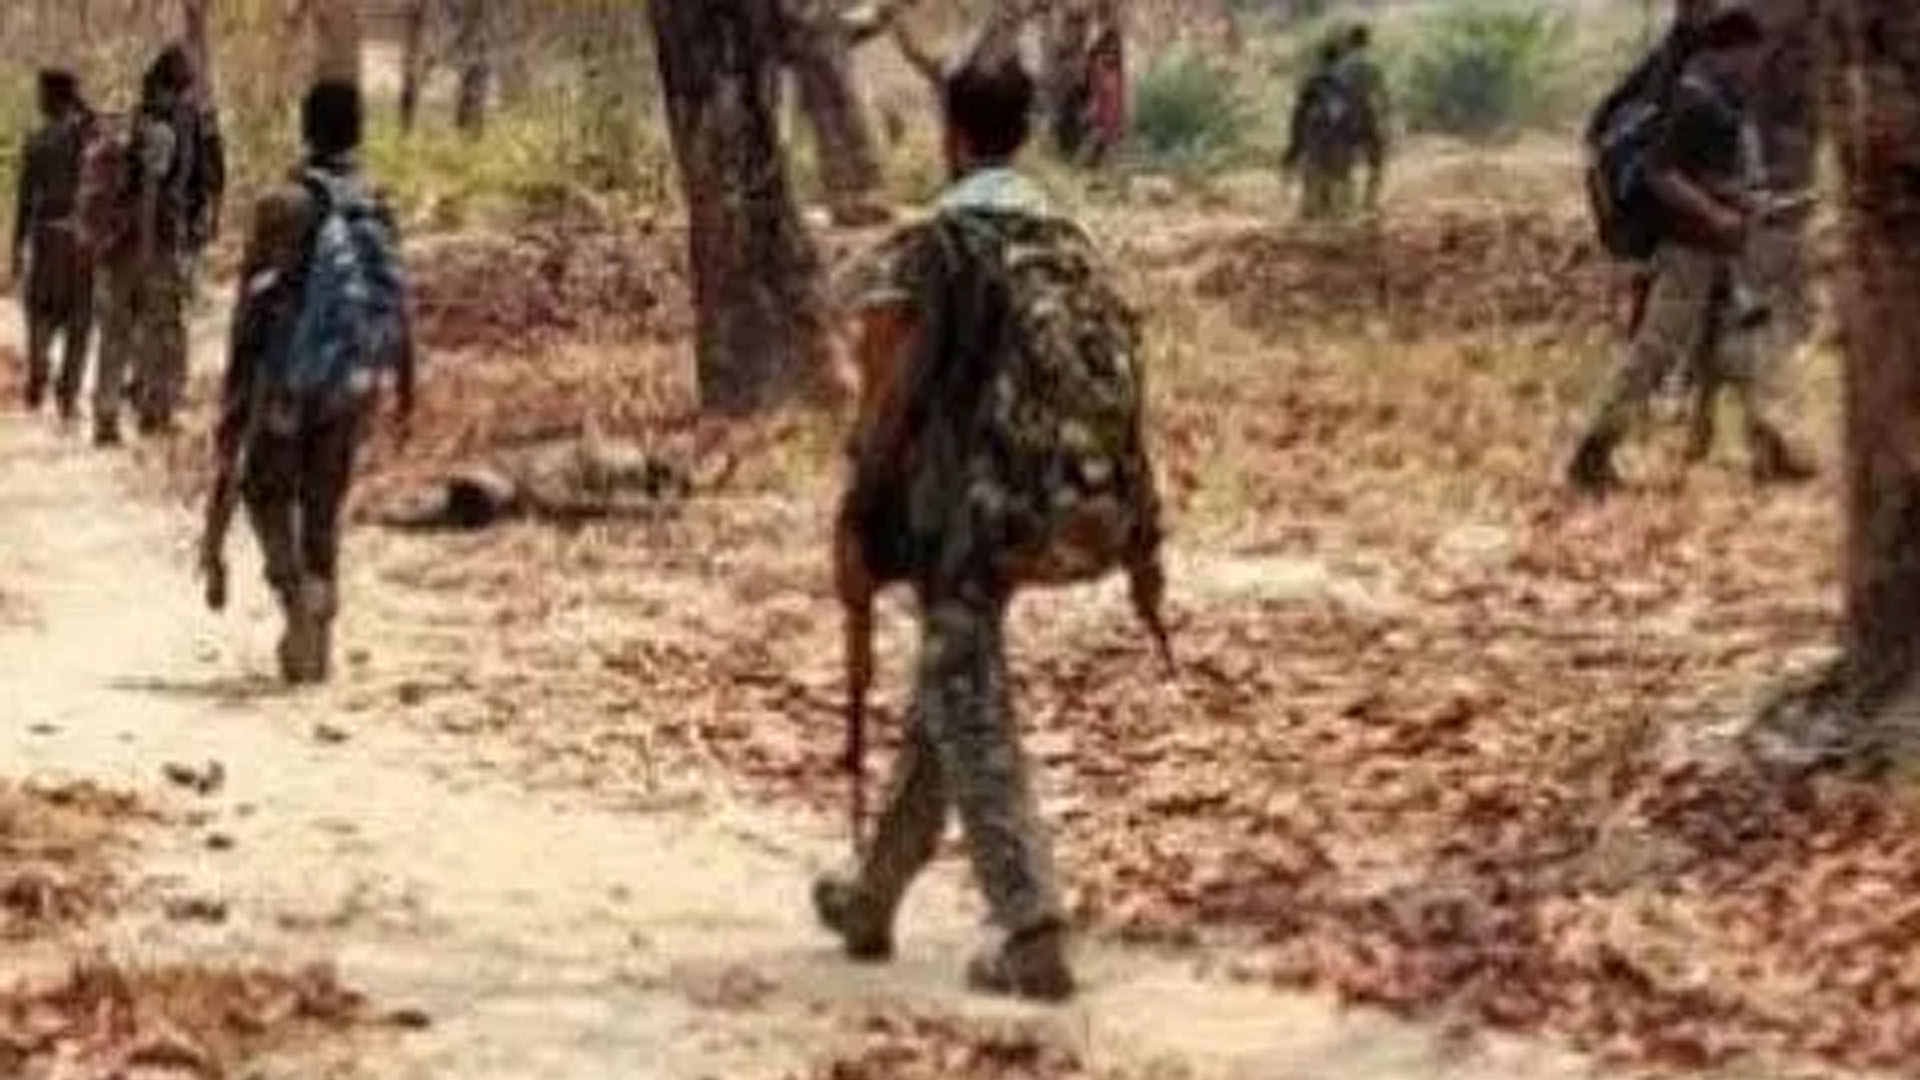 Naxalite commander killed, weapons recovered from encounter site